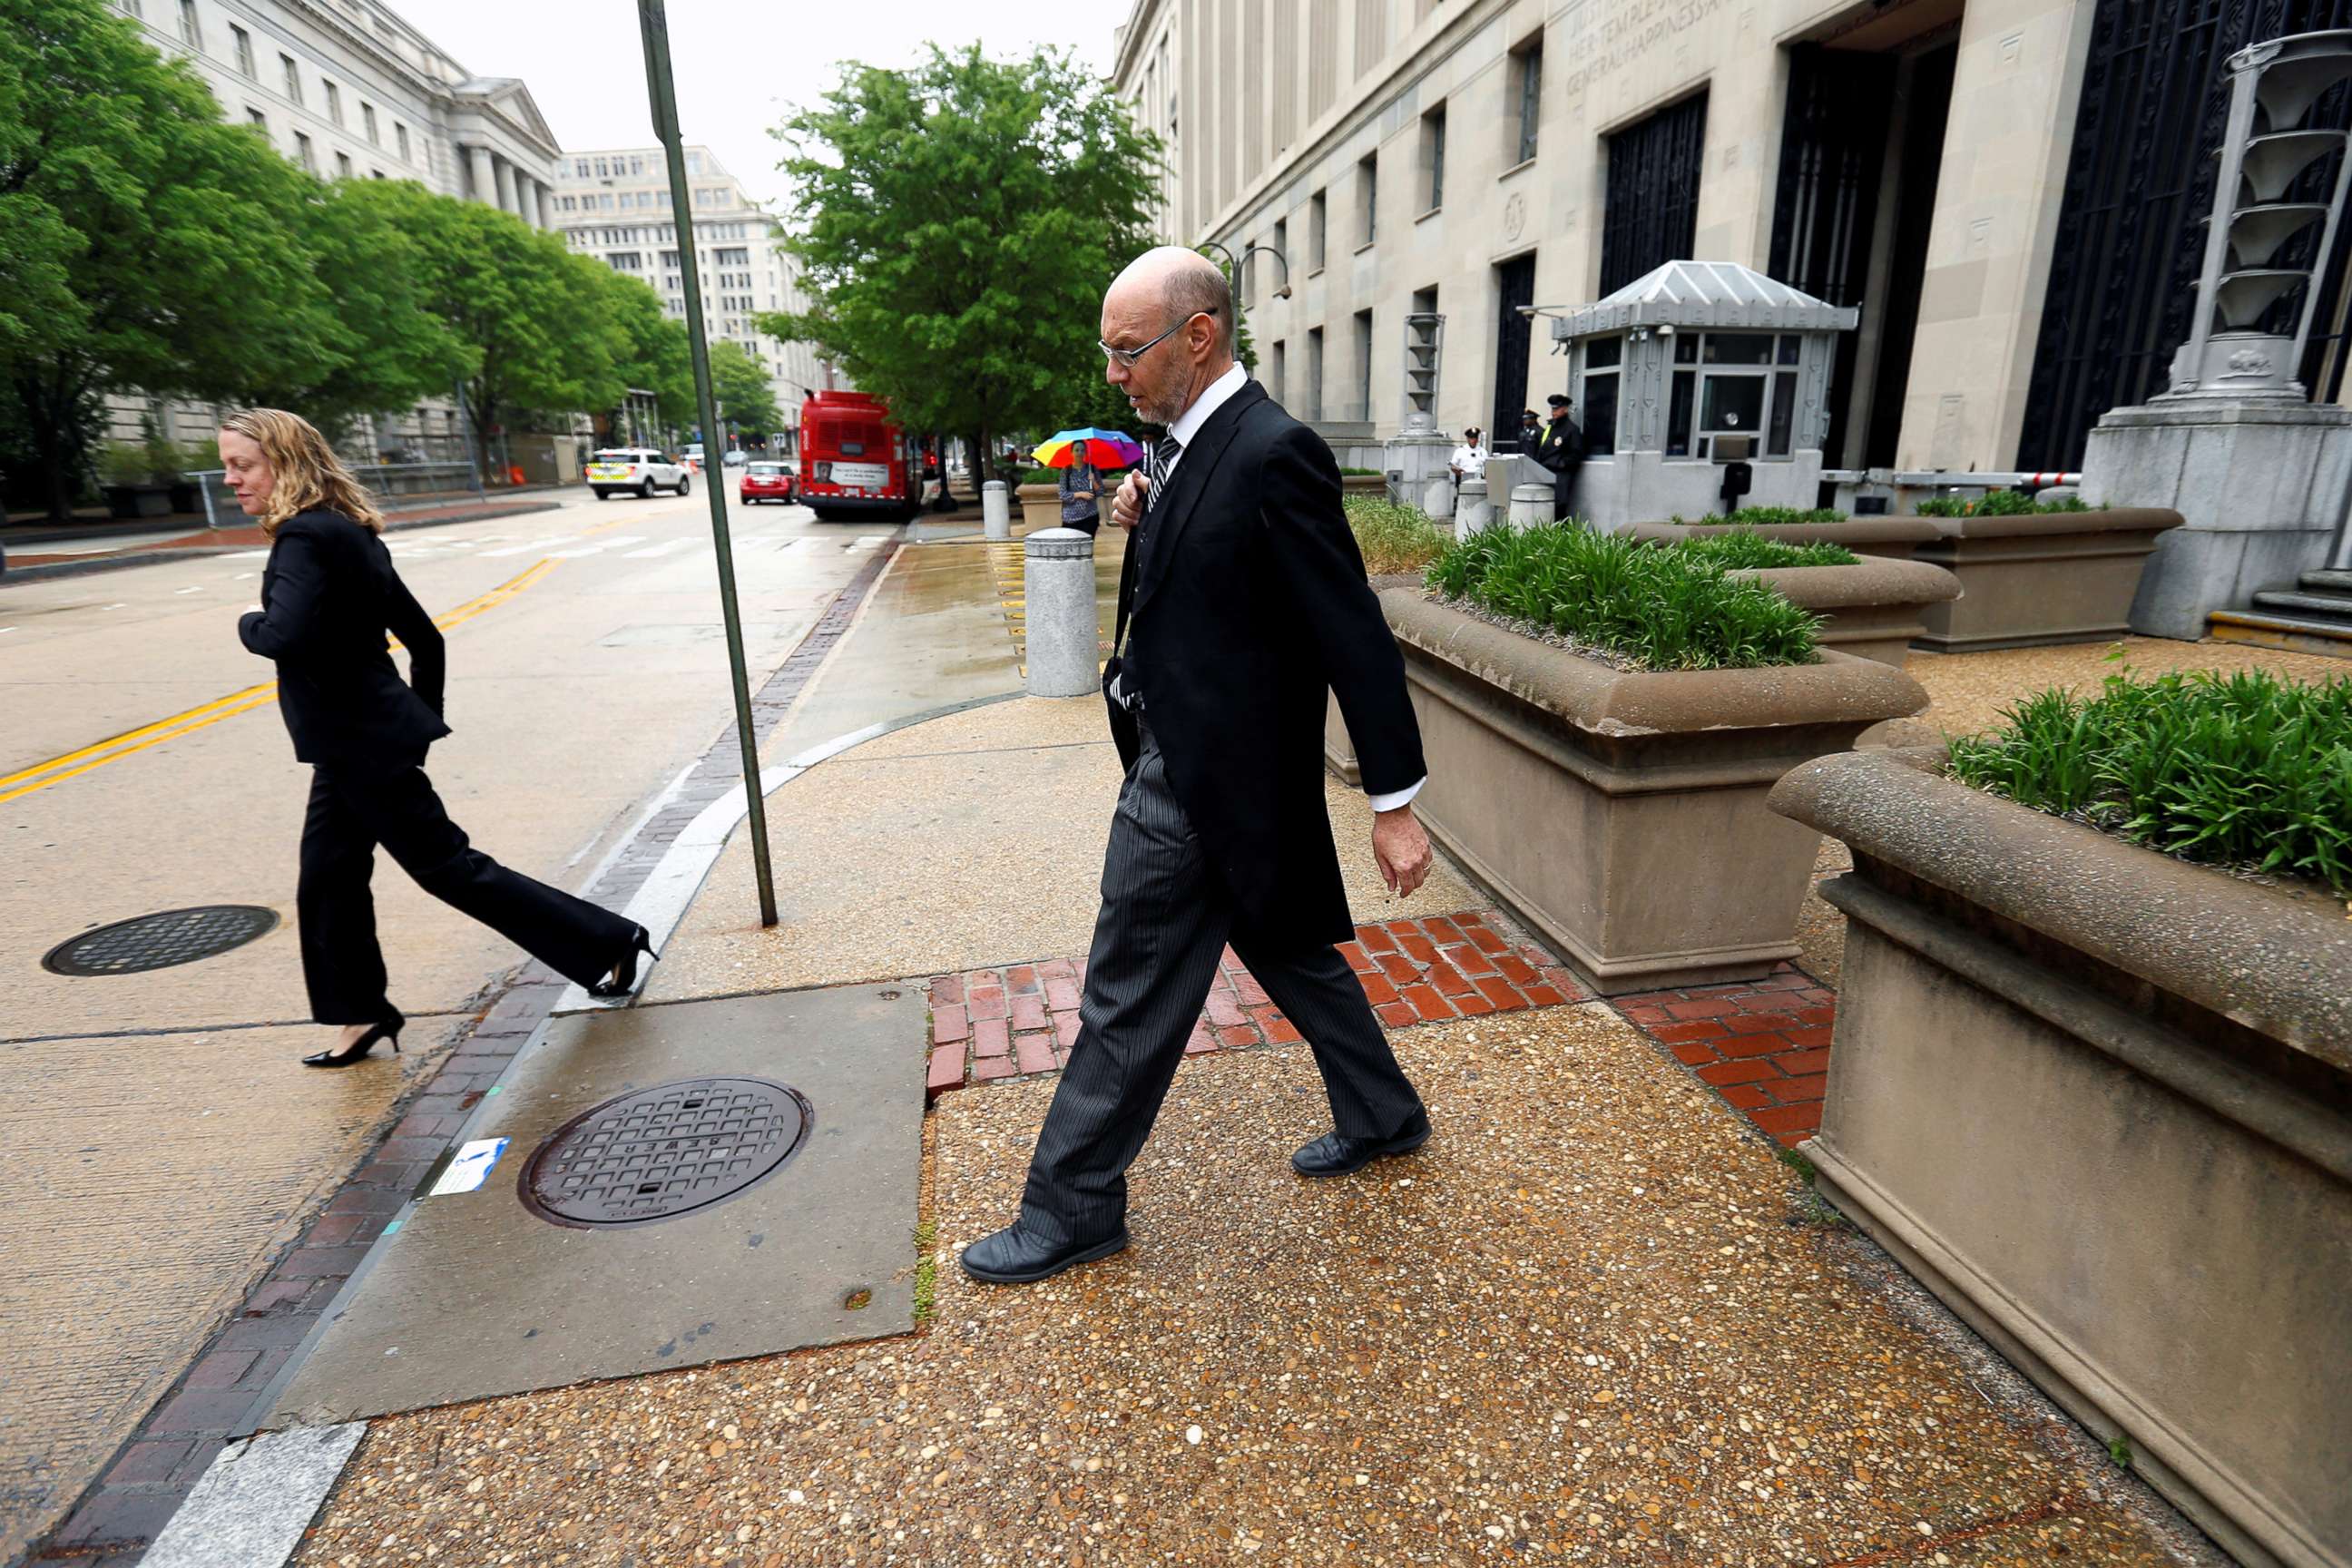 PHOTO: U.S. Deputy Solicitor General Michael Dreeben departs the U.S. Justice Department in traditional morning coat on his way to argue his one-hundredth case before the U.S. Supreme Court in Washington, D.C., April 27, 2016.